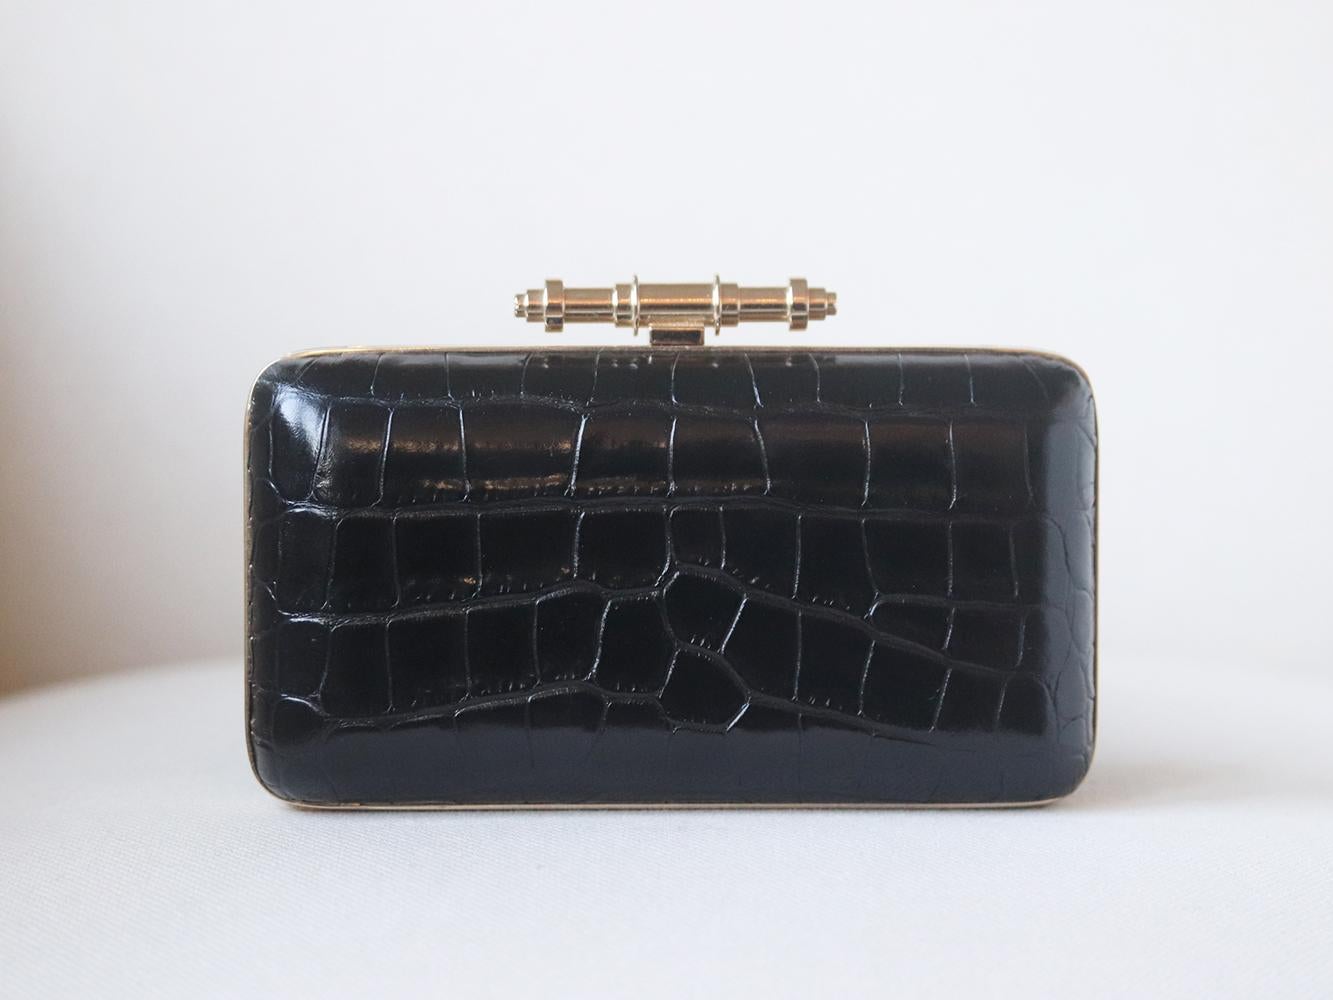 Givenchy showcases its flair for dramatic and statement-making design with this Obsedia box clutch, it’s beautifully crafted from black croc-effect leather and adorned gold-tone metal clasp and matching chain.
Black croc-effect leather.
Clasp